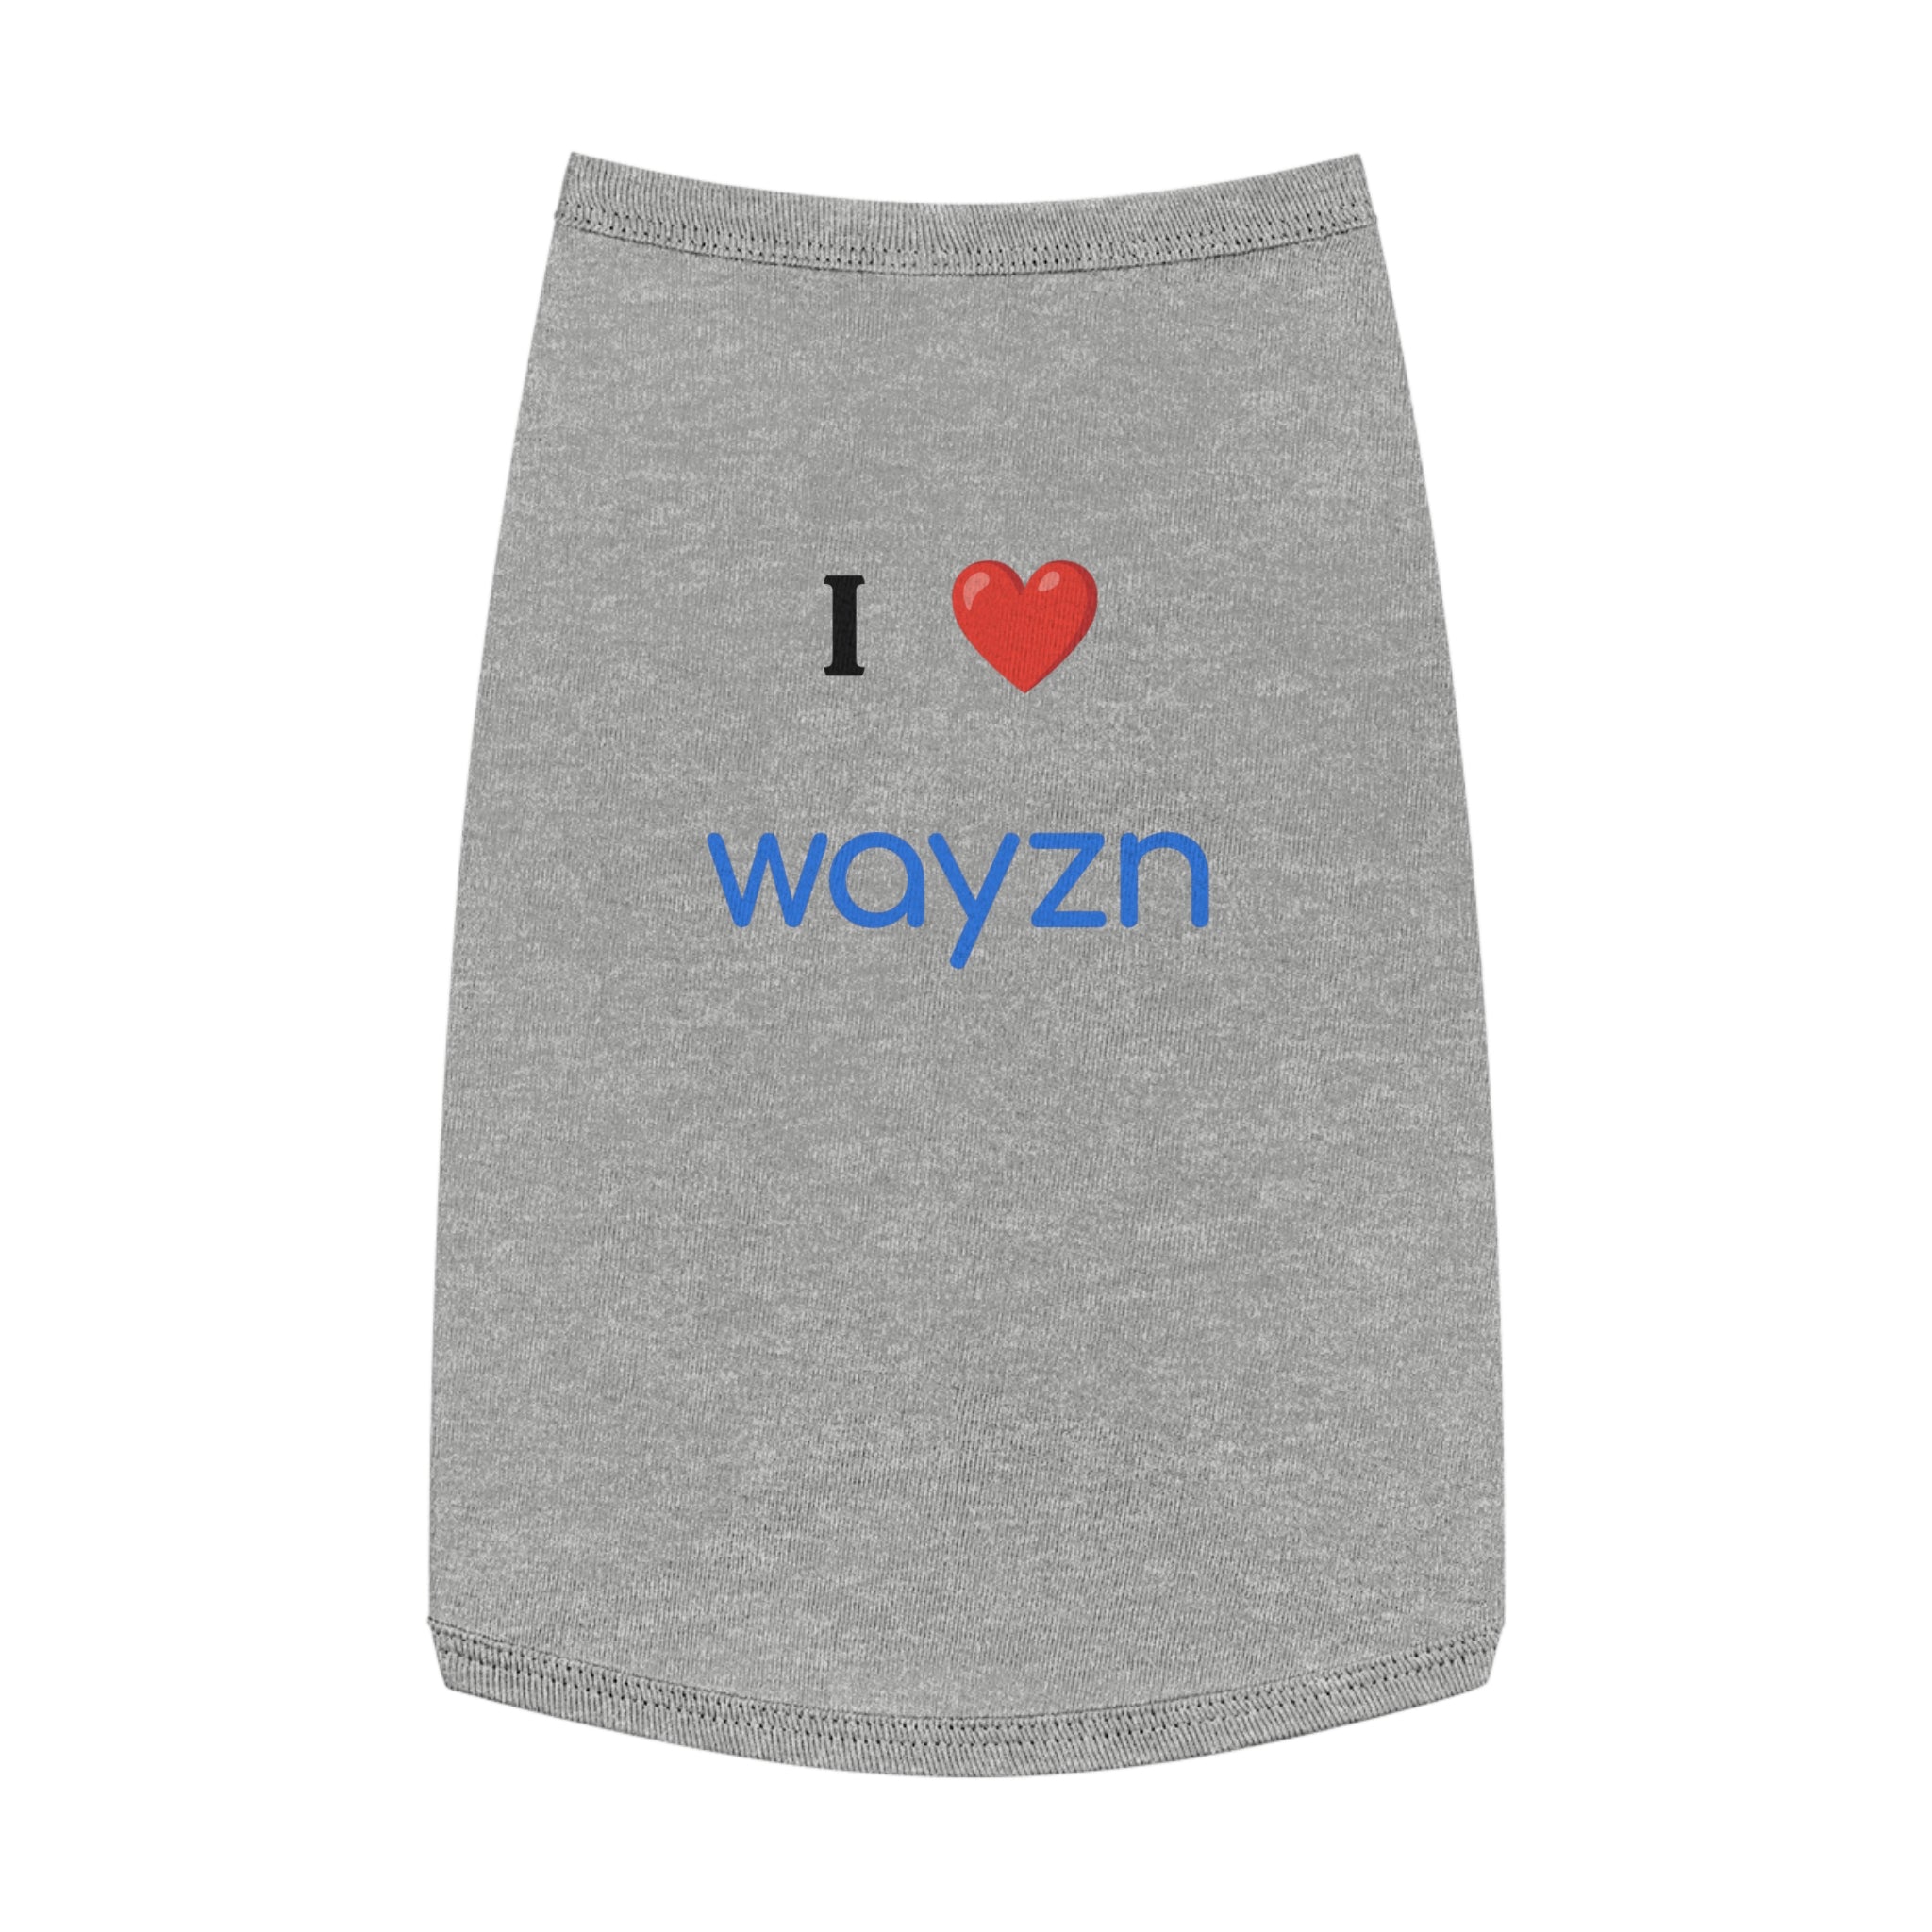 I Heart Wayzn - Dog Jersey: A grey shirt with a red heart and blue text, perfect for your furry friend.